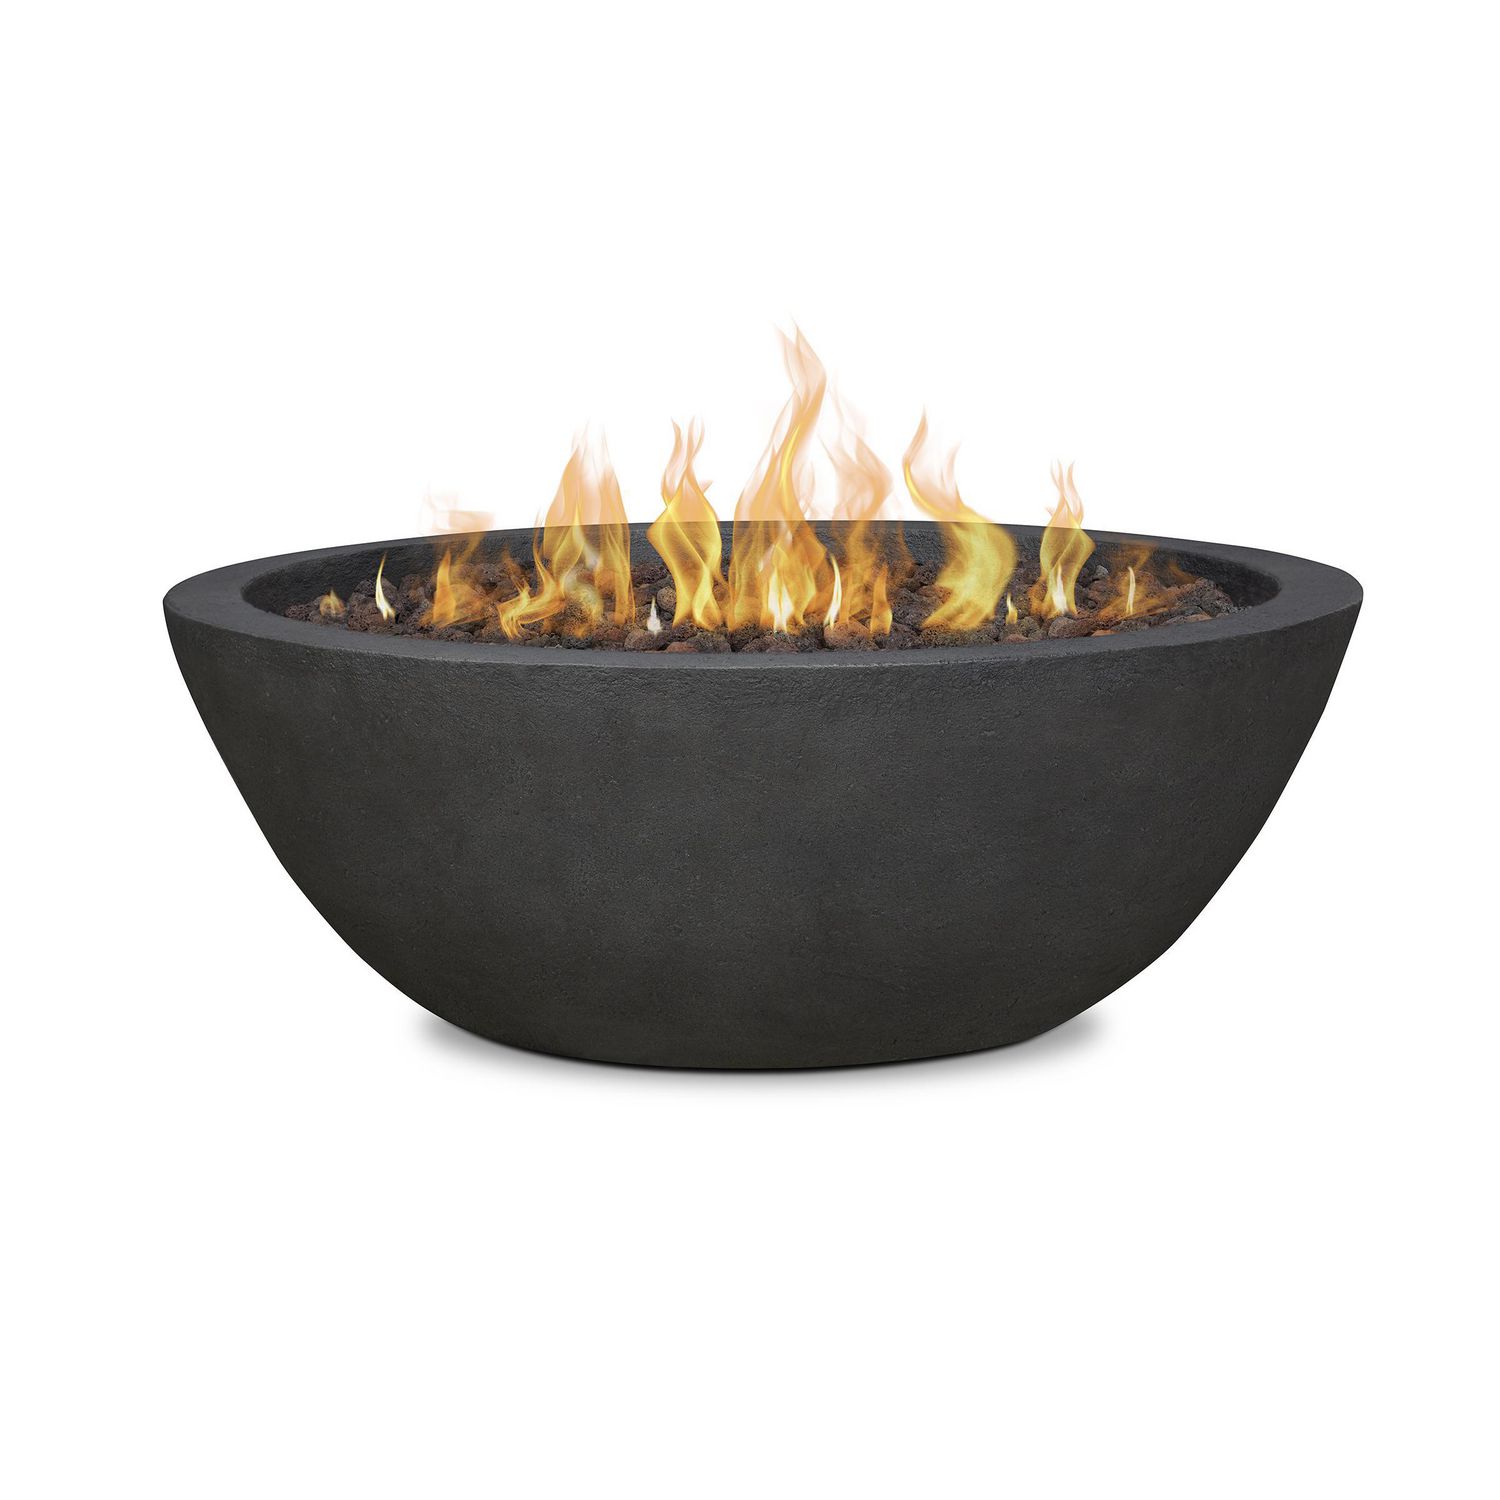 Riverside Propane Fire Bowl In Shale, How To Convert Propane Natural Gas Fire Pit